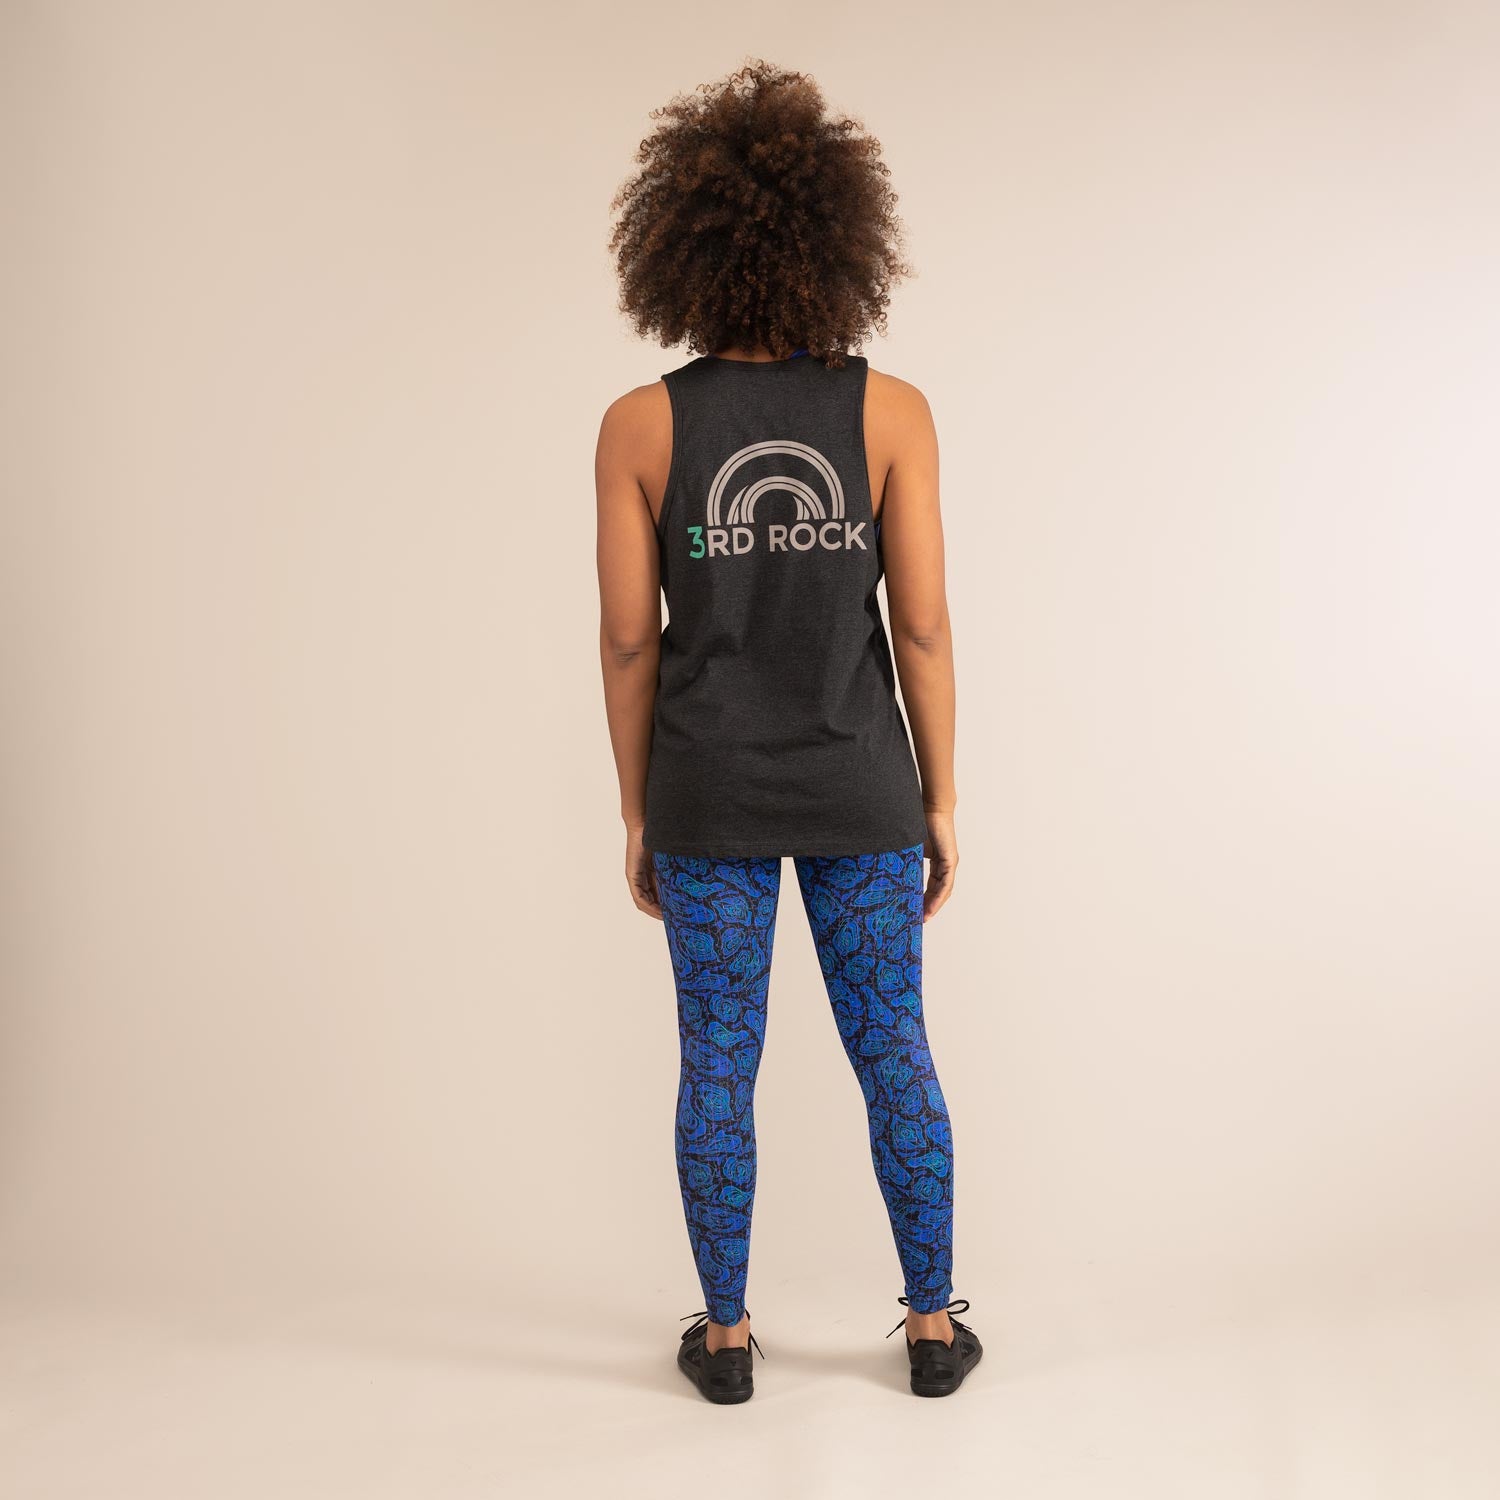 ROMAN LOGO VEST | Organic Cotton Action Vest | 3RD ROCK Clothing -  Kendal is 5ft 8 with a 36" bust and wears a size M F